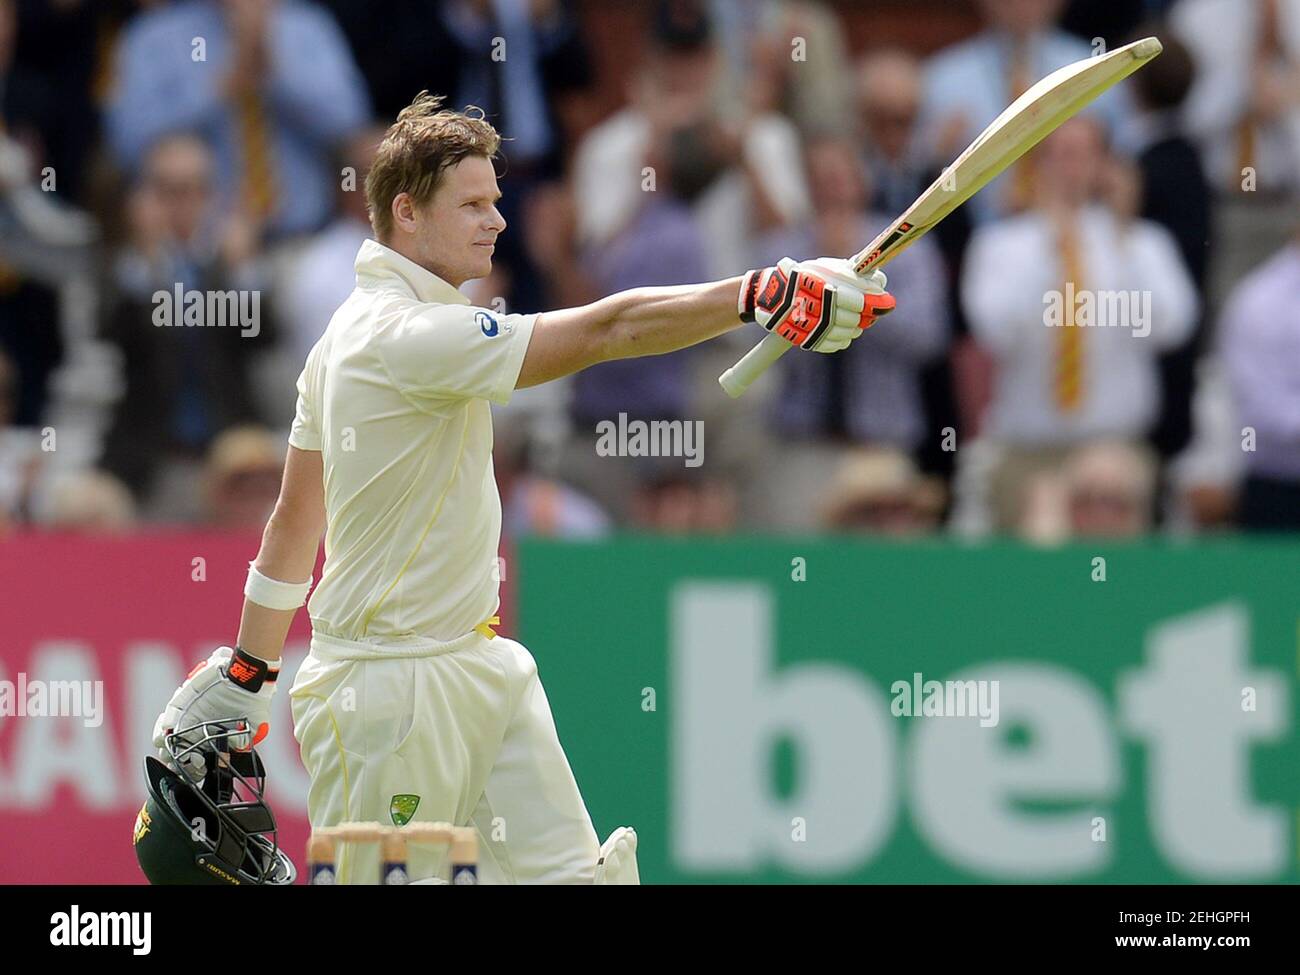 Cricket - England v Australia - Investec Ashes Test Series Second Test - Lord?s - 17/7/15 Australia's Steve Smith celebrates reaching his double century Reuters / Philip Brown Livepic Stock Photo